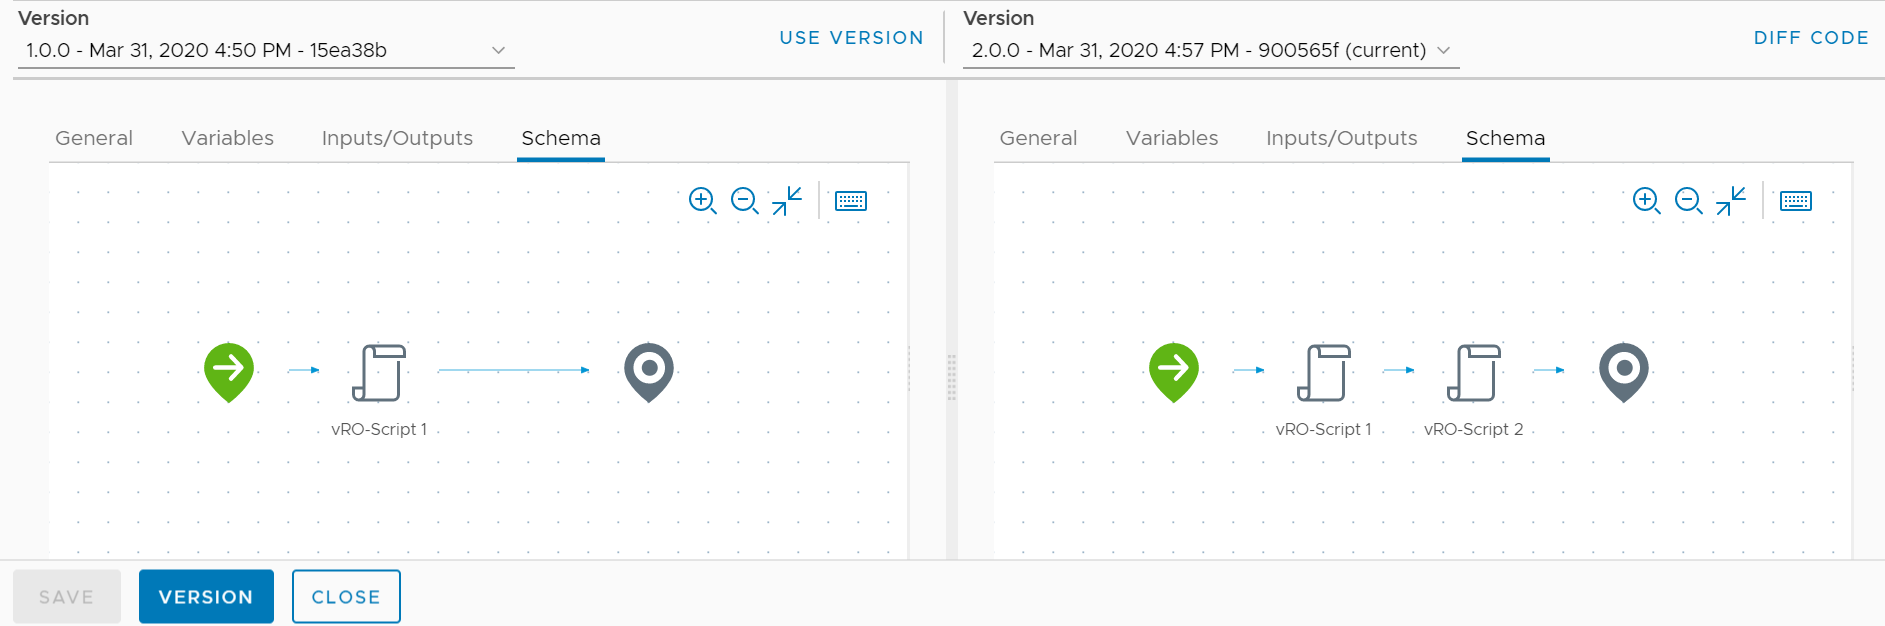 The vRealize Orchestrator Client interface displays a side-by-side comparison between two versions of a workflow.